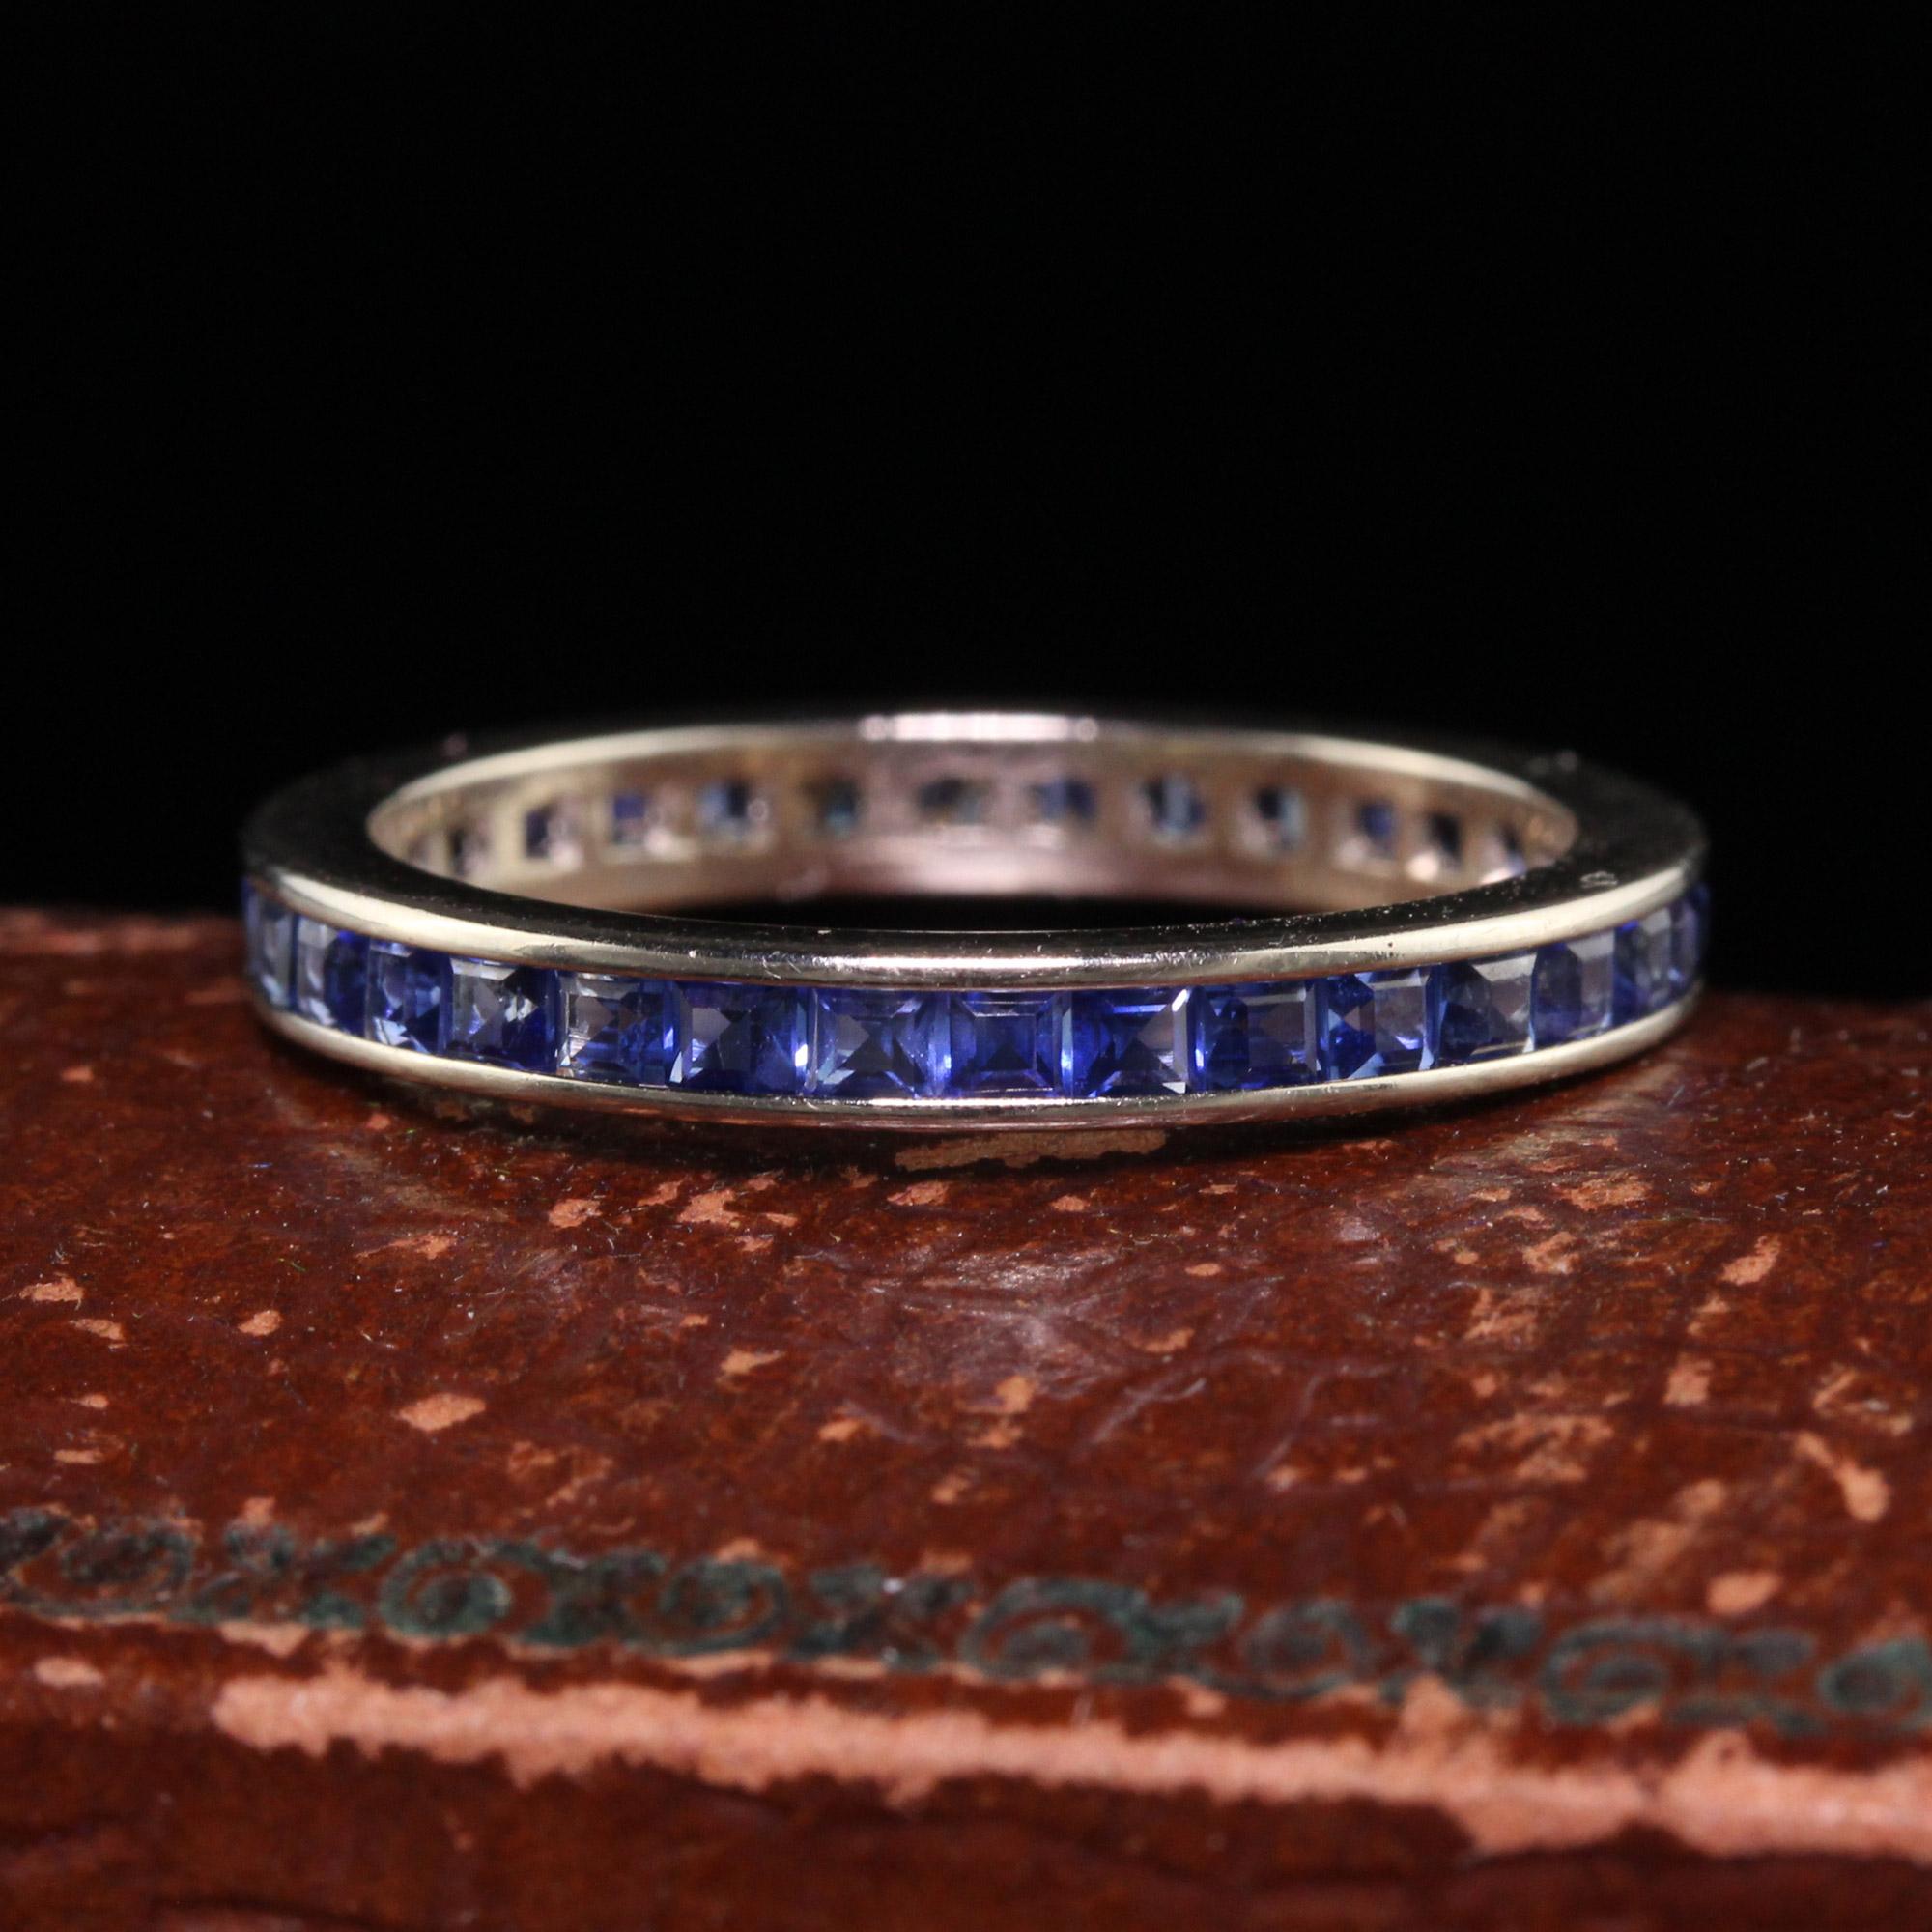 Beautiful Vintage Retro 14K White Gold Square Cut Sapphire Wedding Eternity Band - Size 7. This beautiful eternity band is crafted in 14k white gold. There are square cut sapphires going around the entire ring and is in great condition.

Item